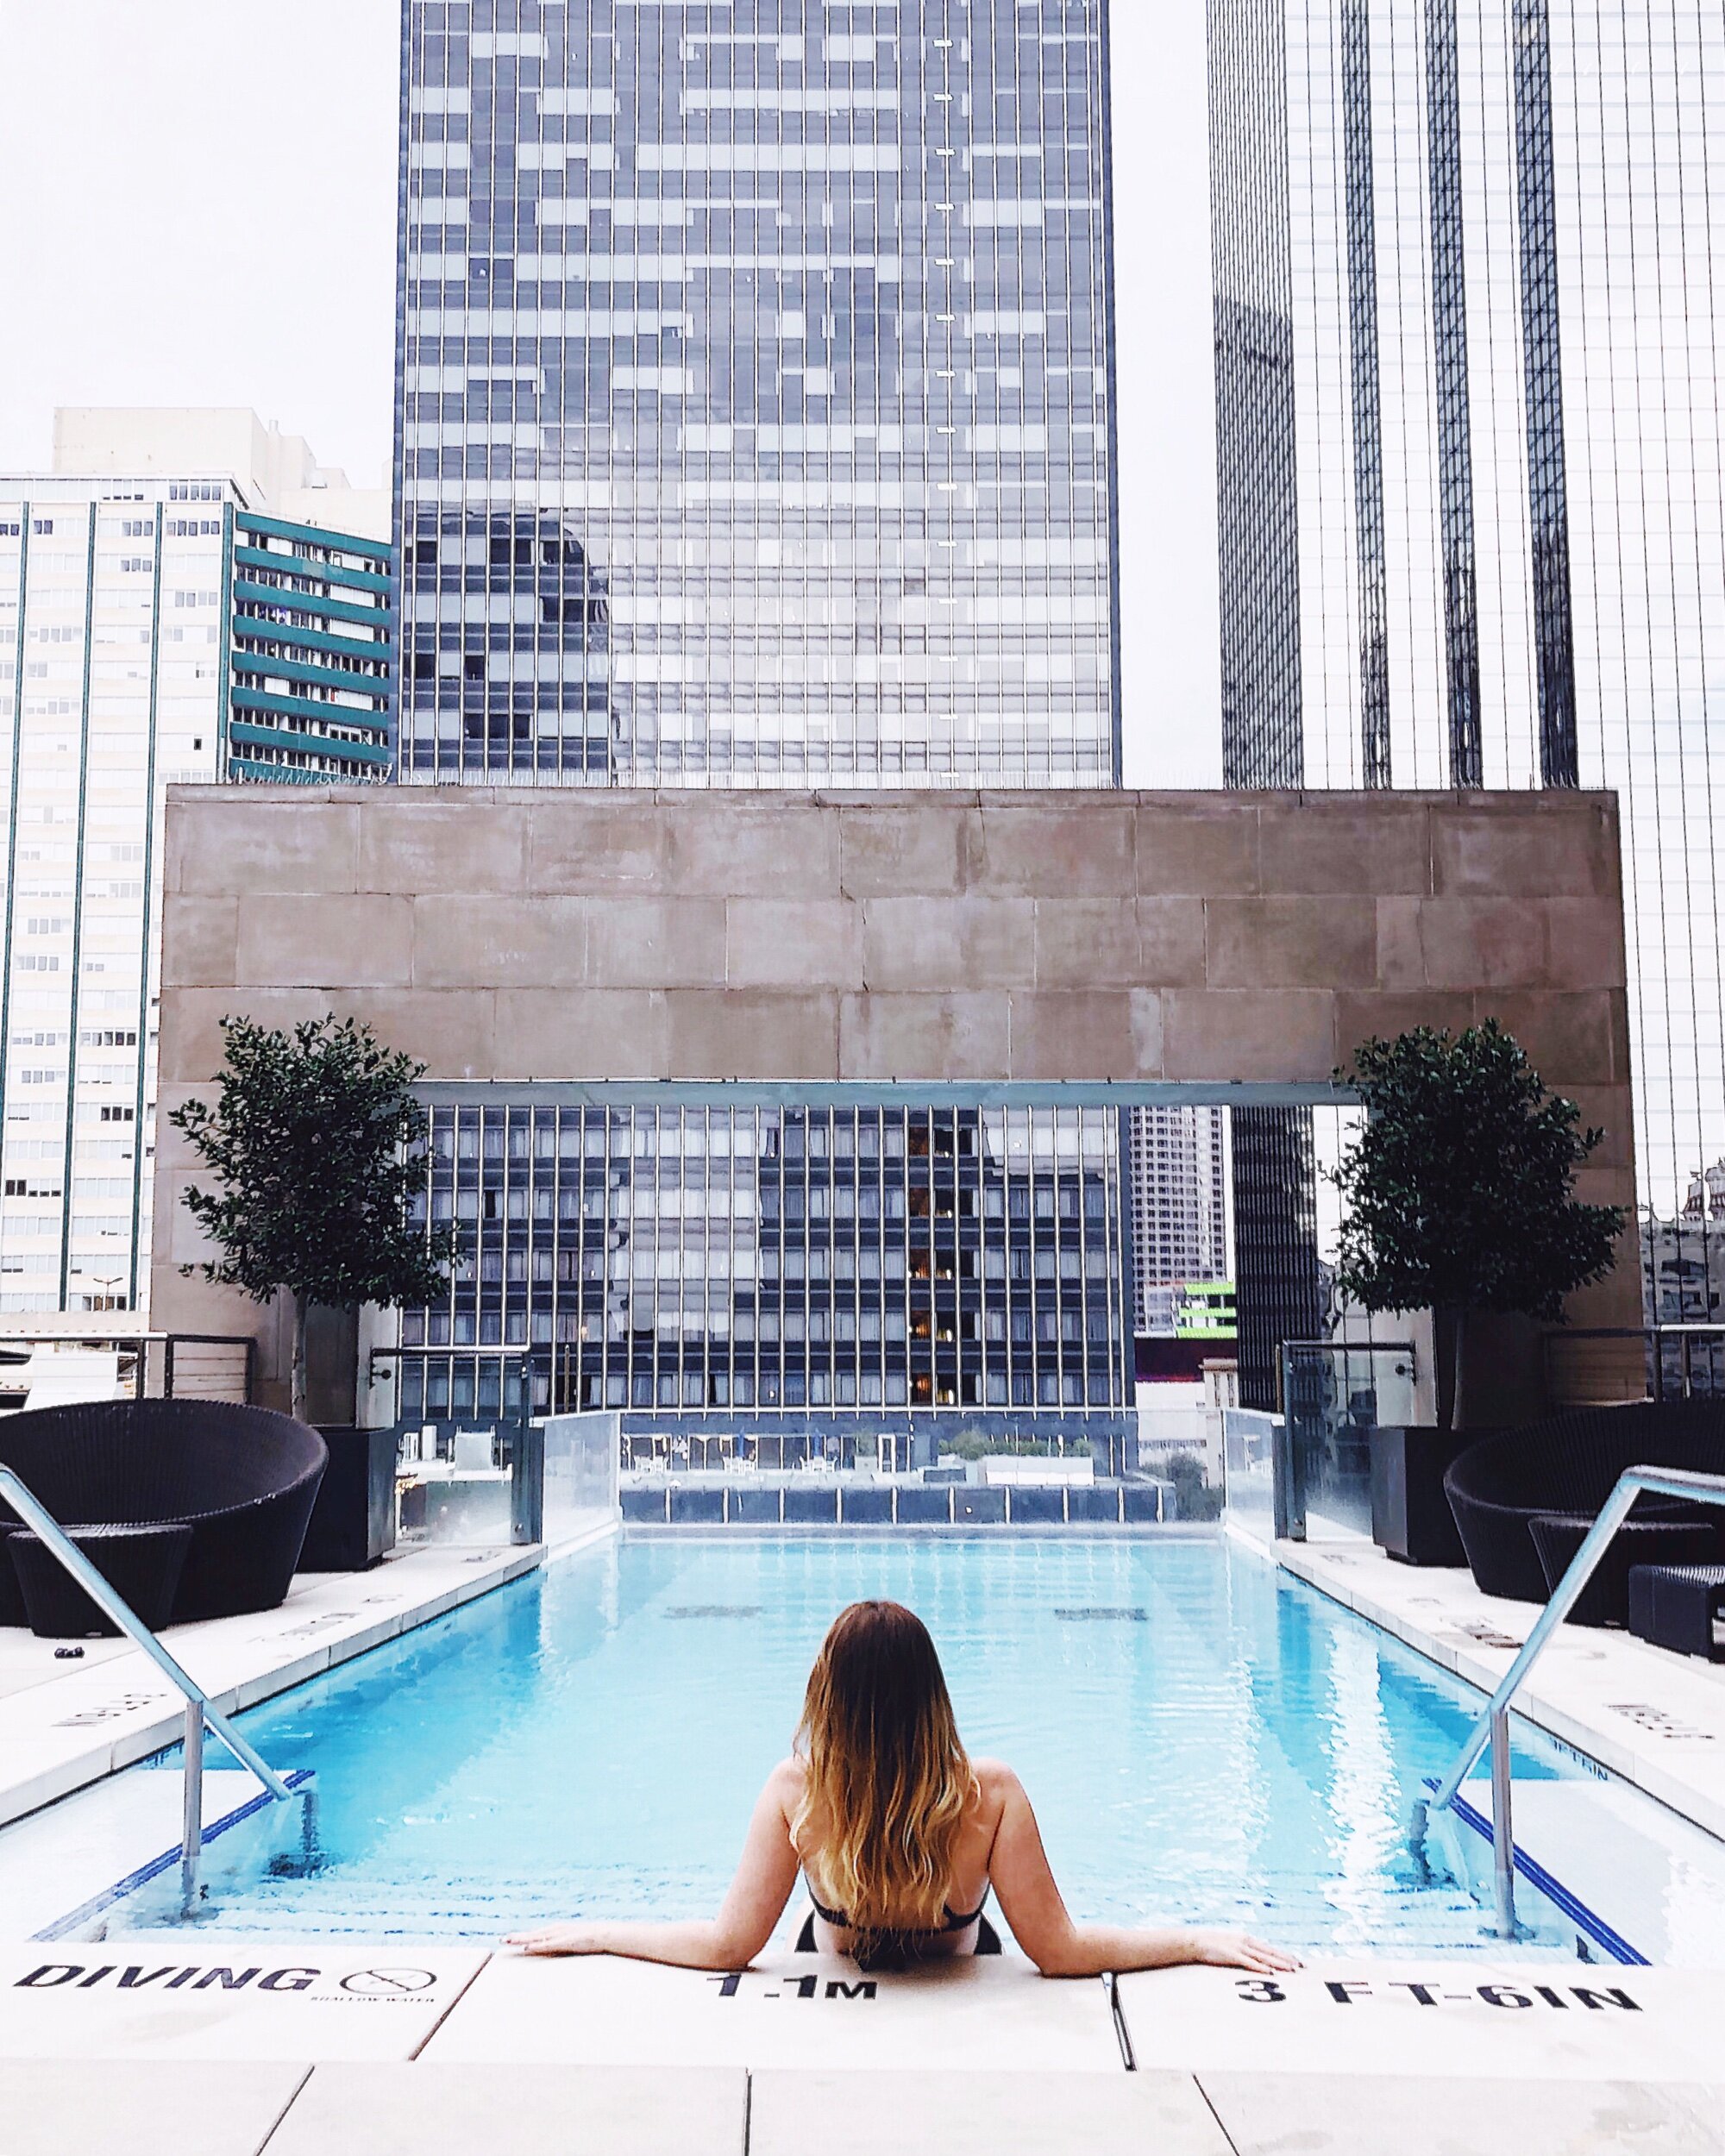 Celebrating Our 5 Year Anniversary: Our Favorite Spots in Dallas, Texas by Christina Foret